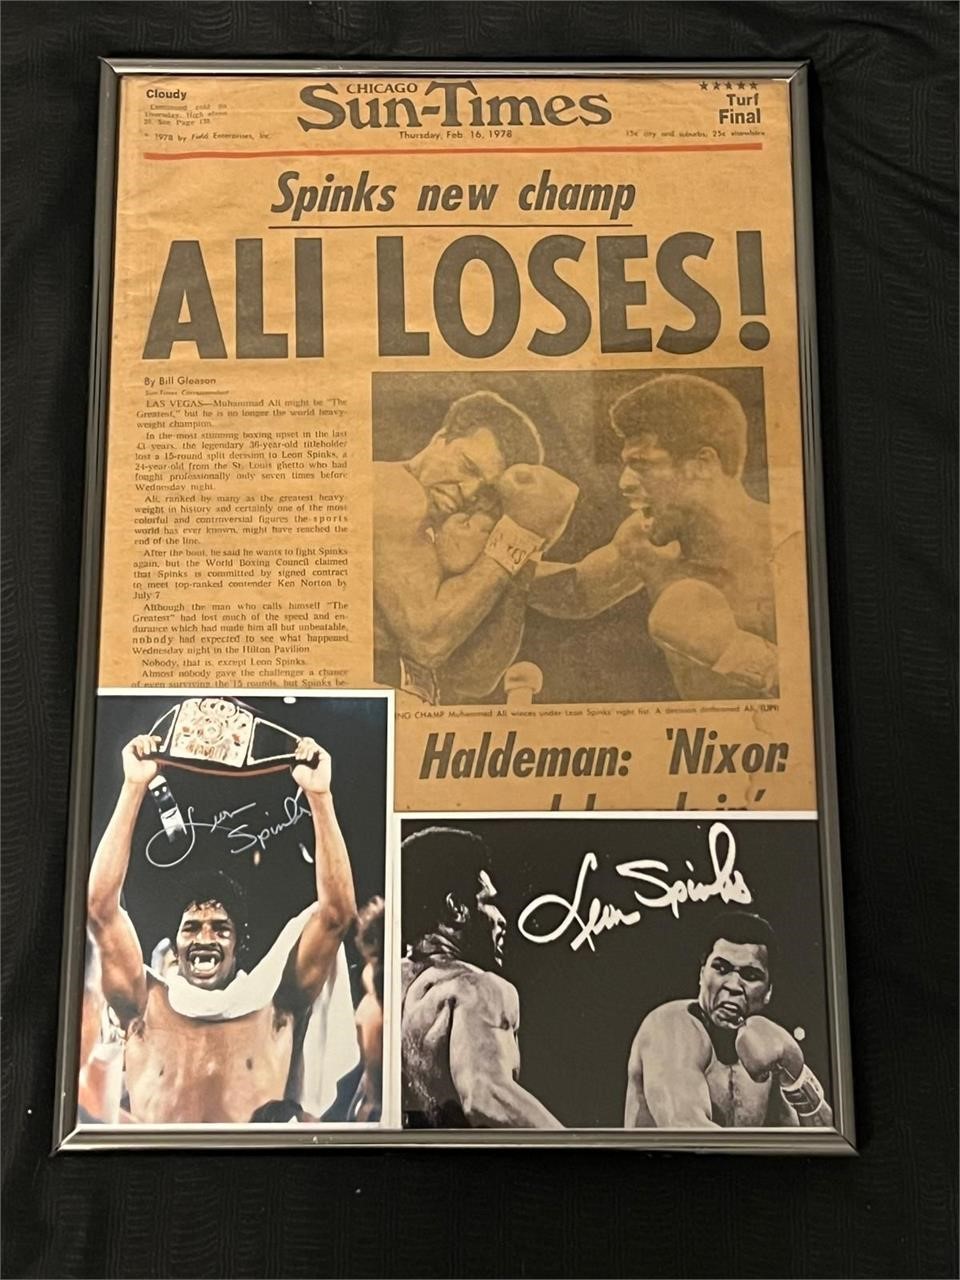 Chicago Sun Times Ali Loses -  Spinks Autograph